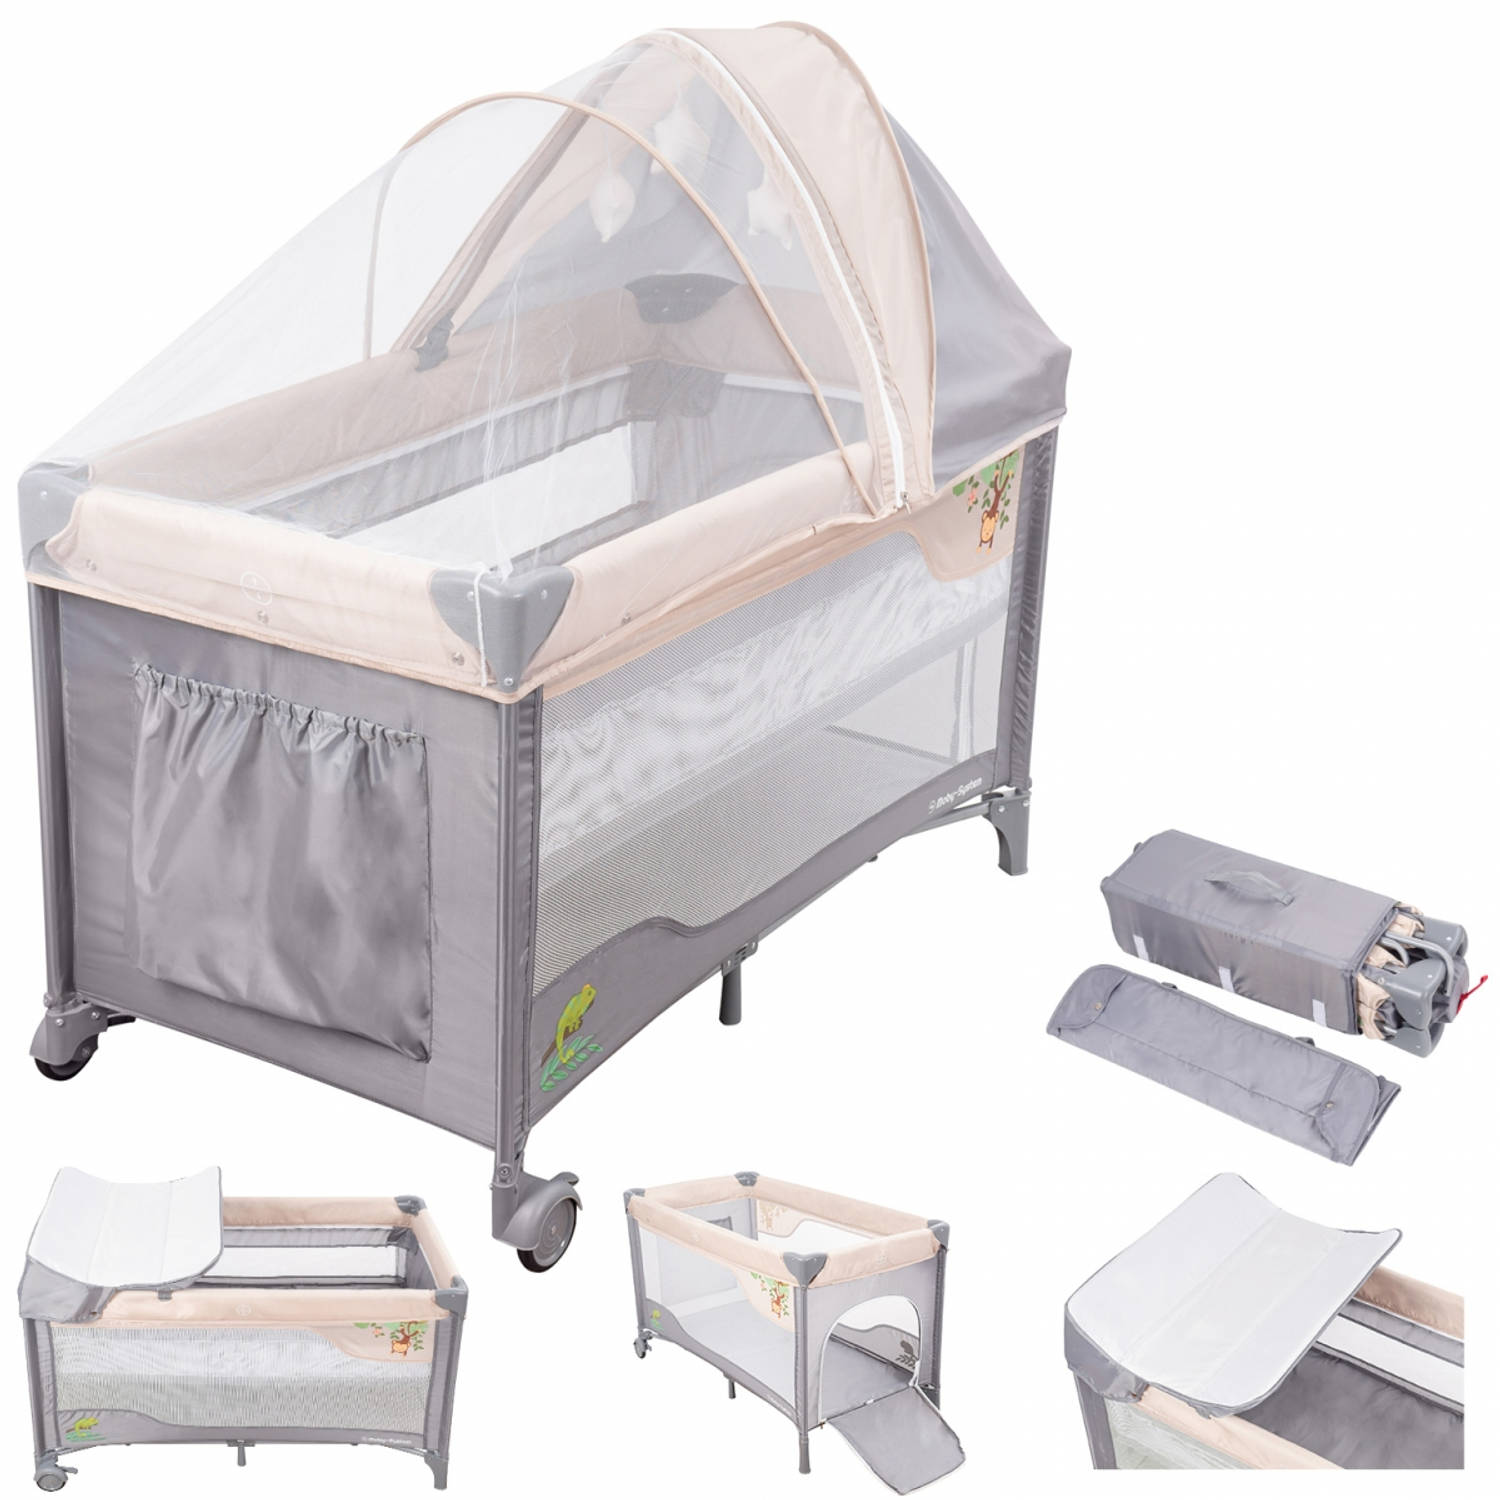 Moby System Campingbedje - Reisbedje baby - met commode |